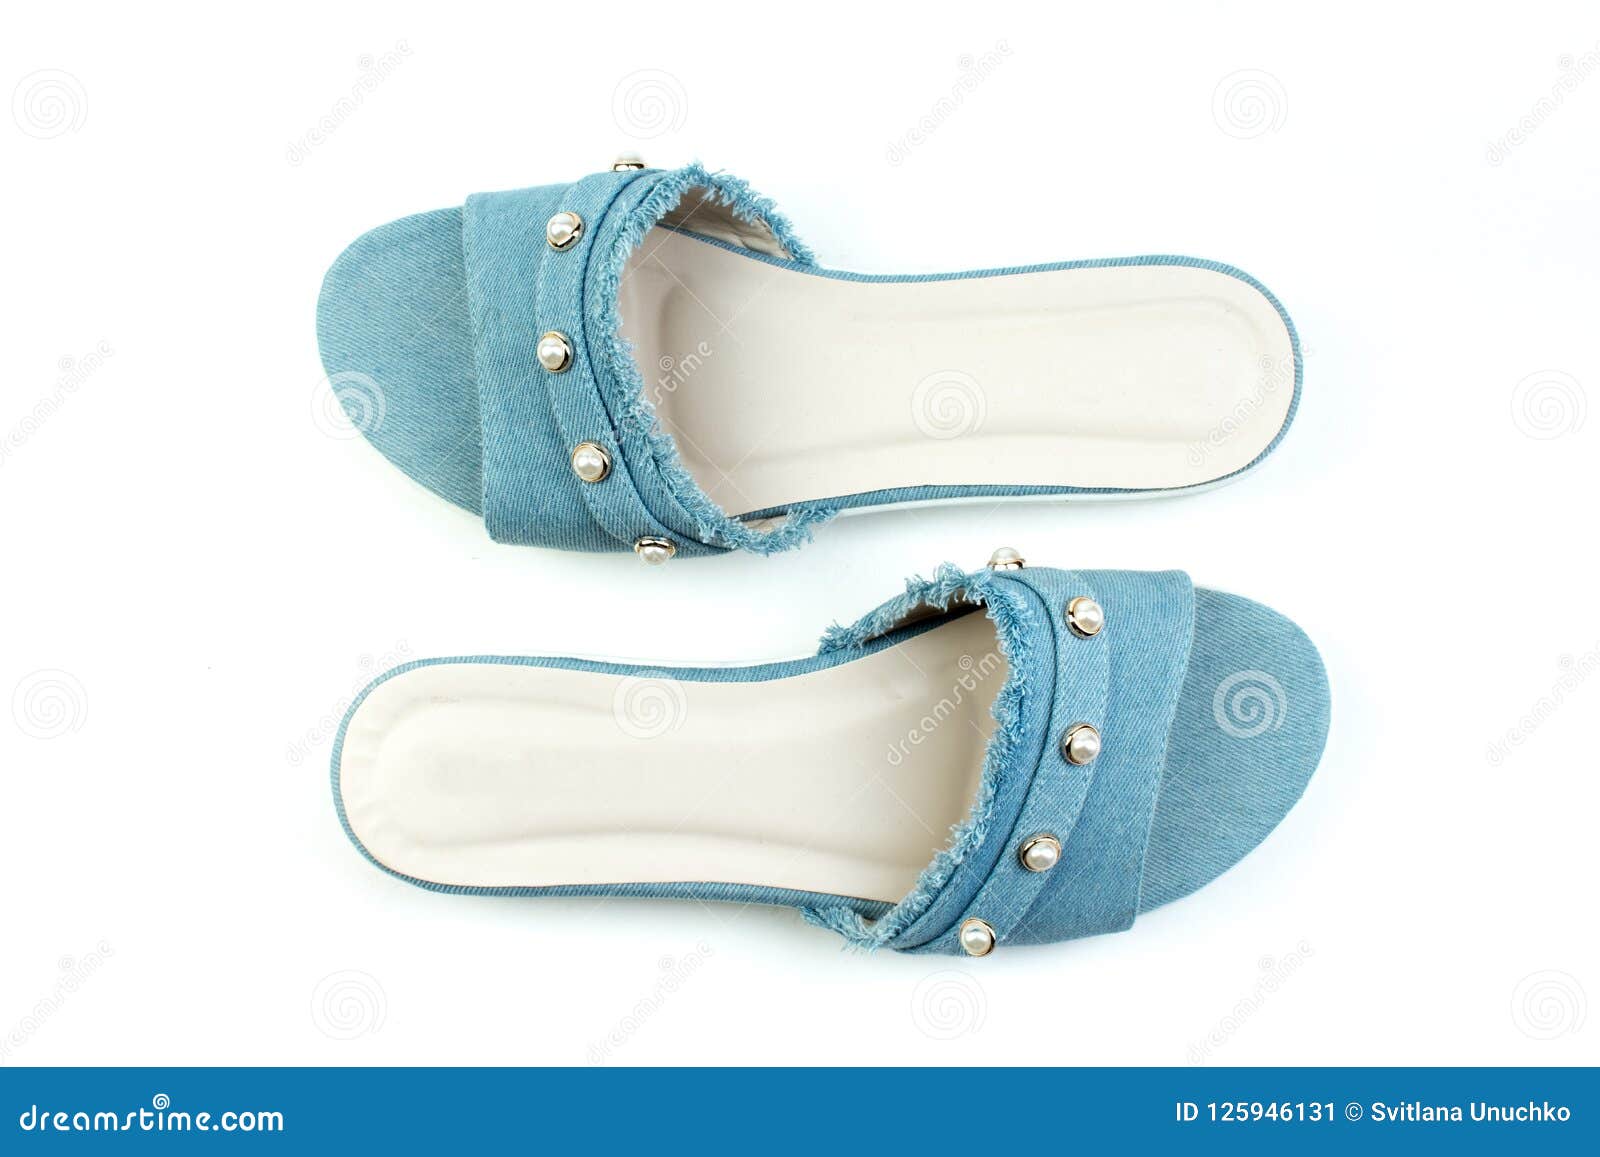 Amazon.com: Handmade Denim Slippers of Recycled jeans : Handmade Products